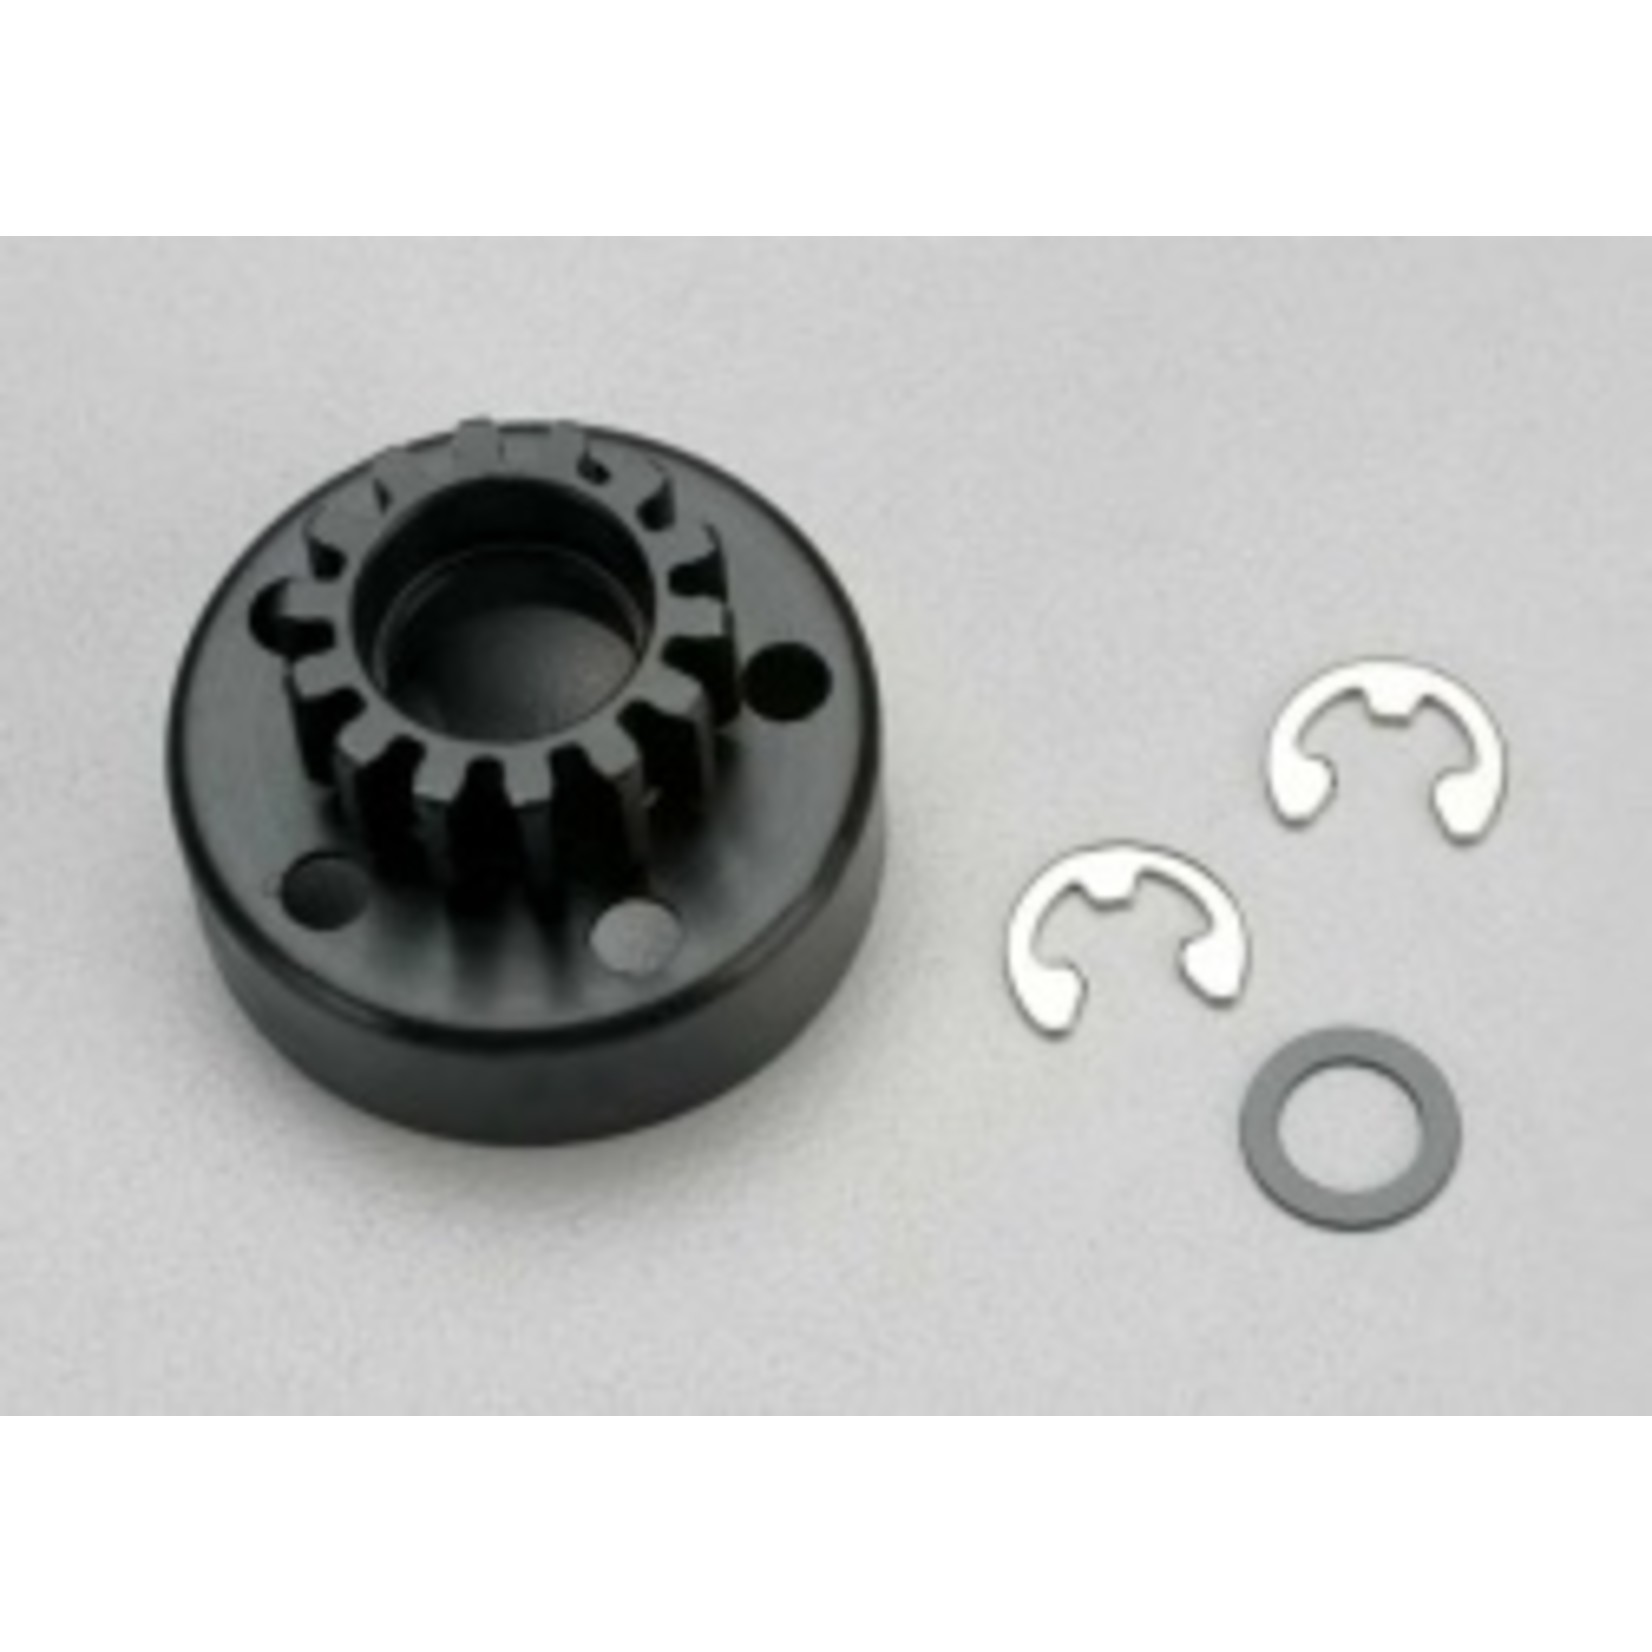 Traxxas Clutch bell (14-tooth)/5x8x0.5mm fiber washer (2)/ 5mm e-clip (requires 5x10x4mm ball bearings part #4609) (1.0 metric pitch)